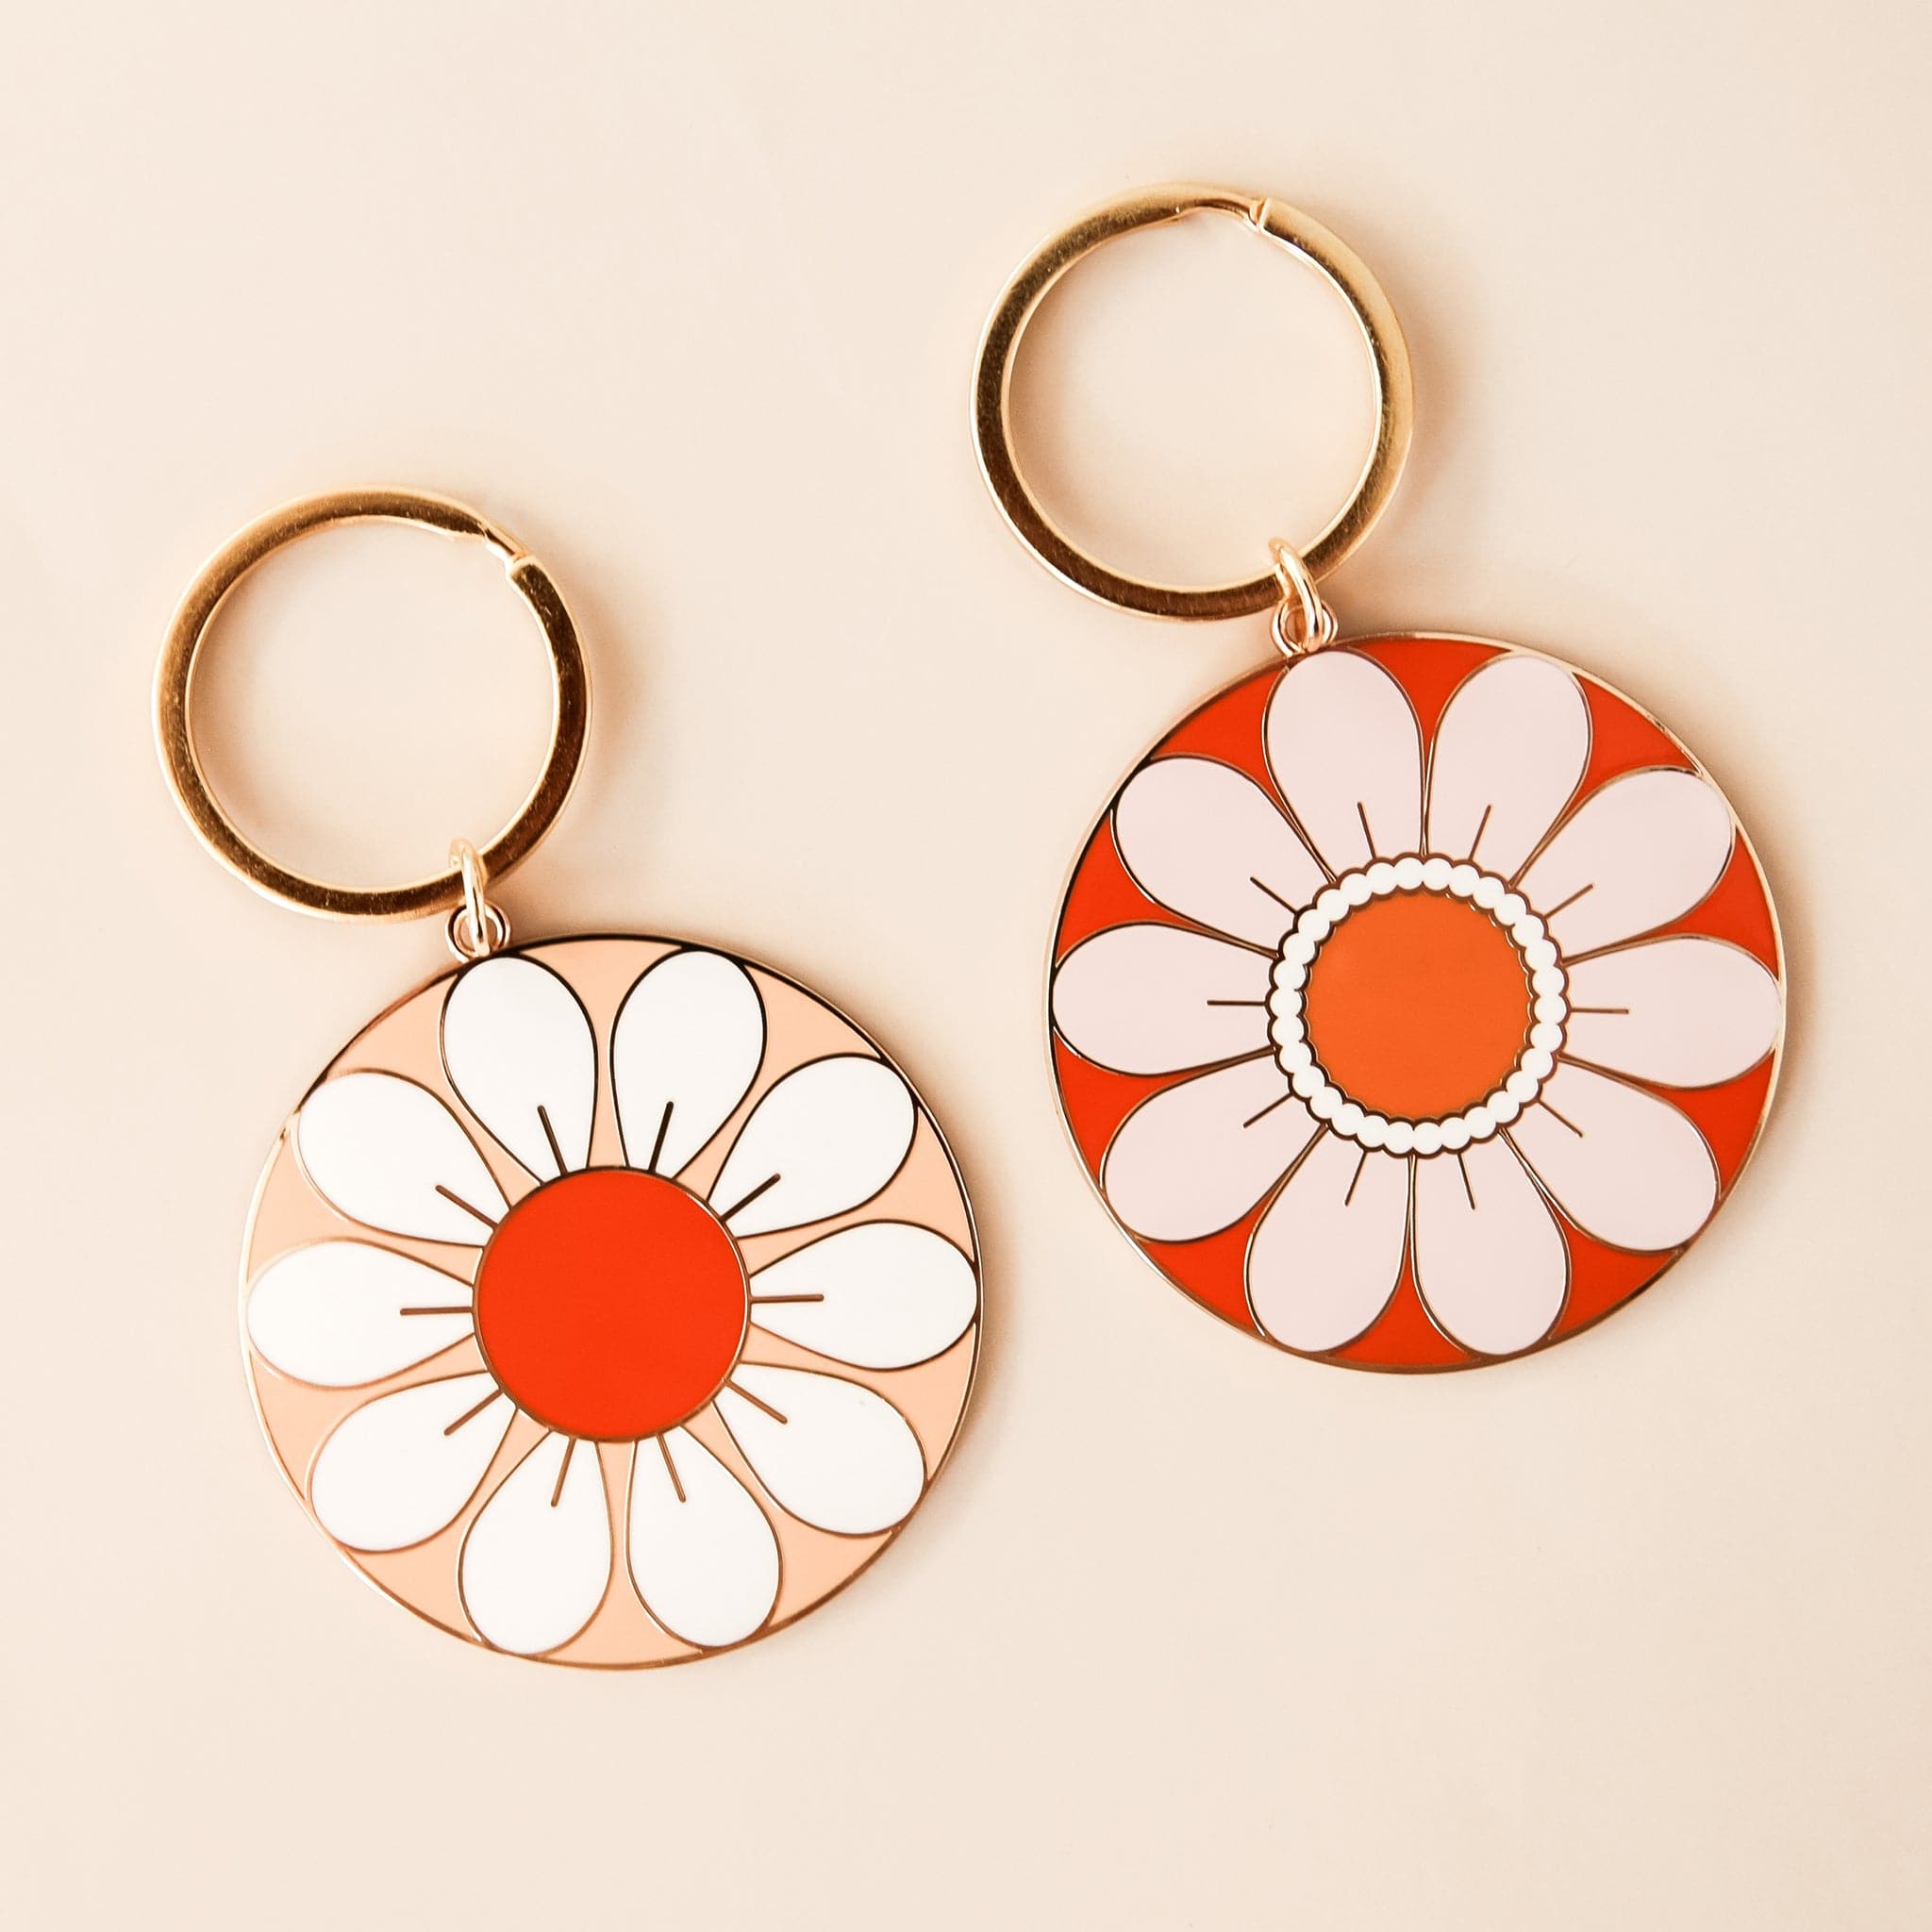 Two circular flower key chains both complete with golden key chain rings. To the left is a flower with white petals and red center and to the right is a flower with light beige petals and orange center. 